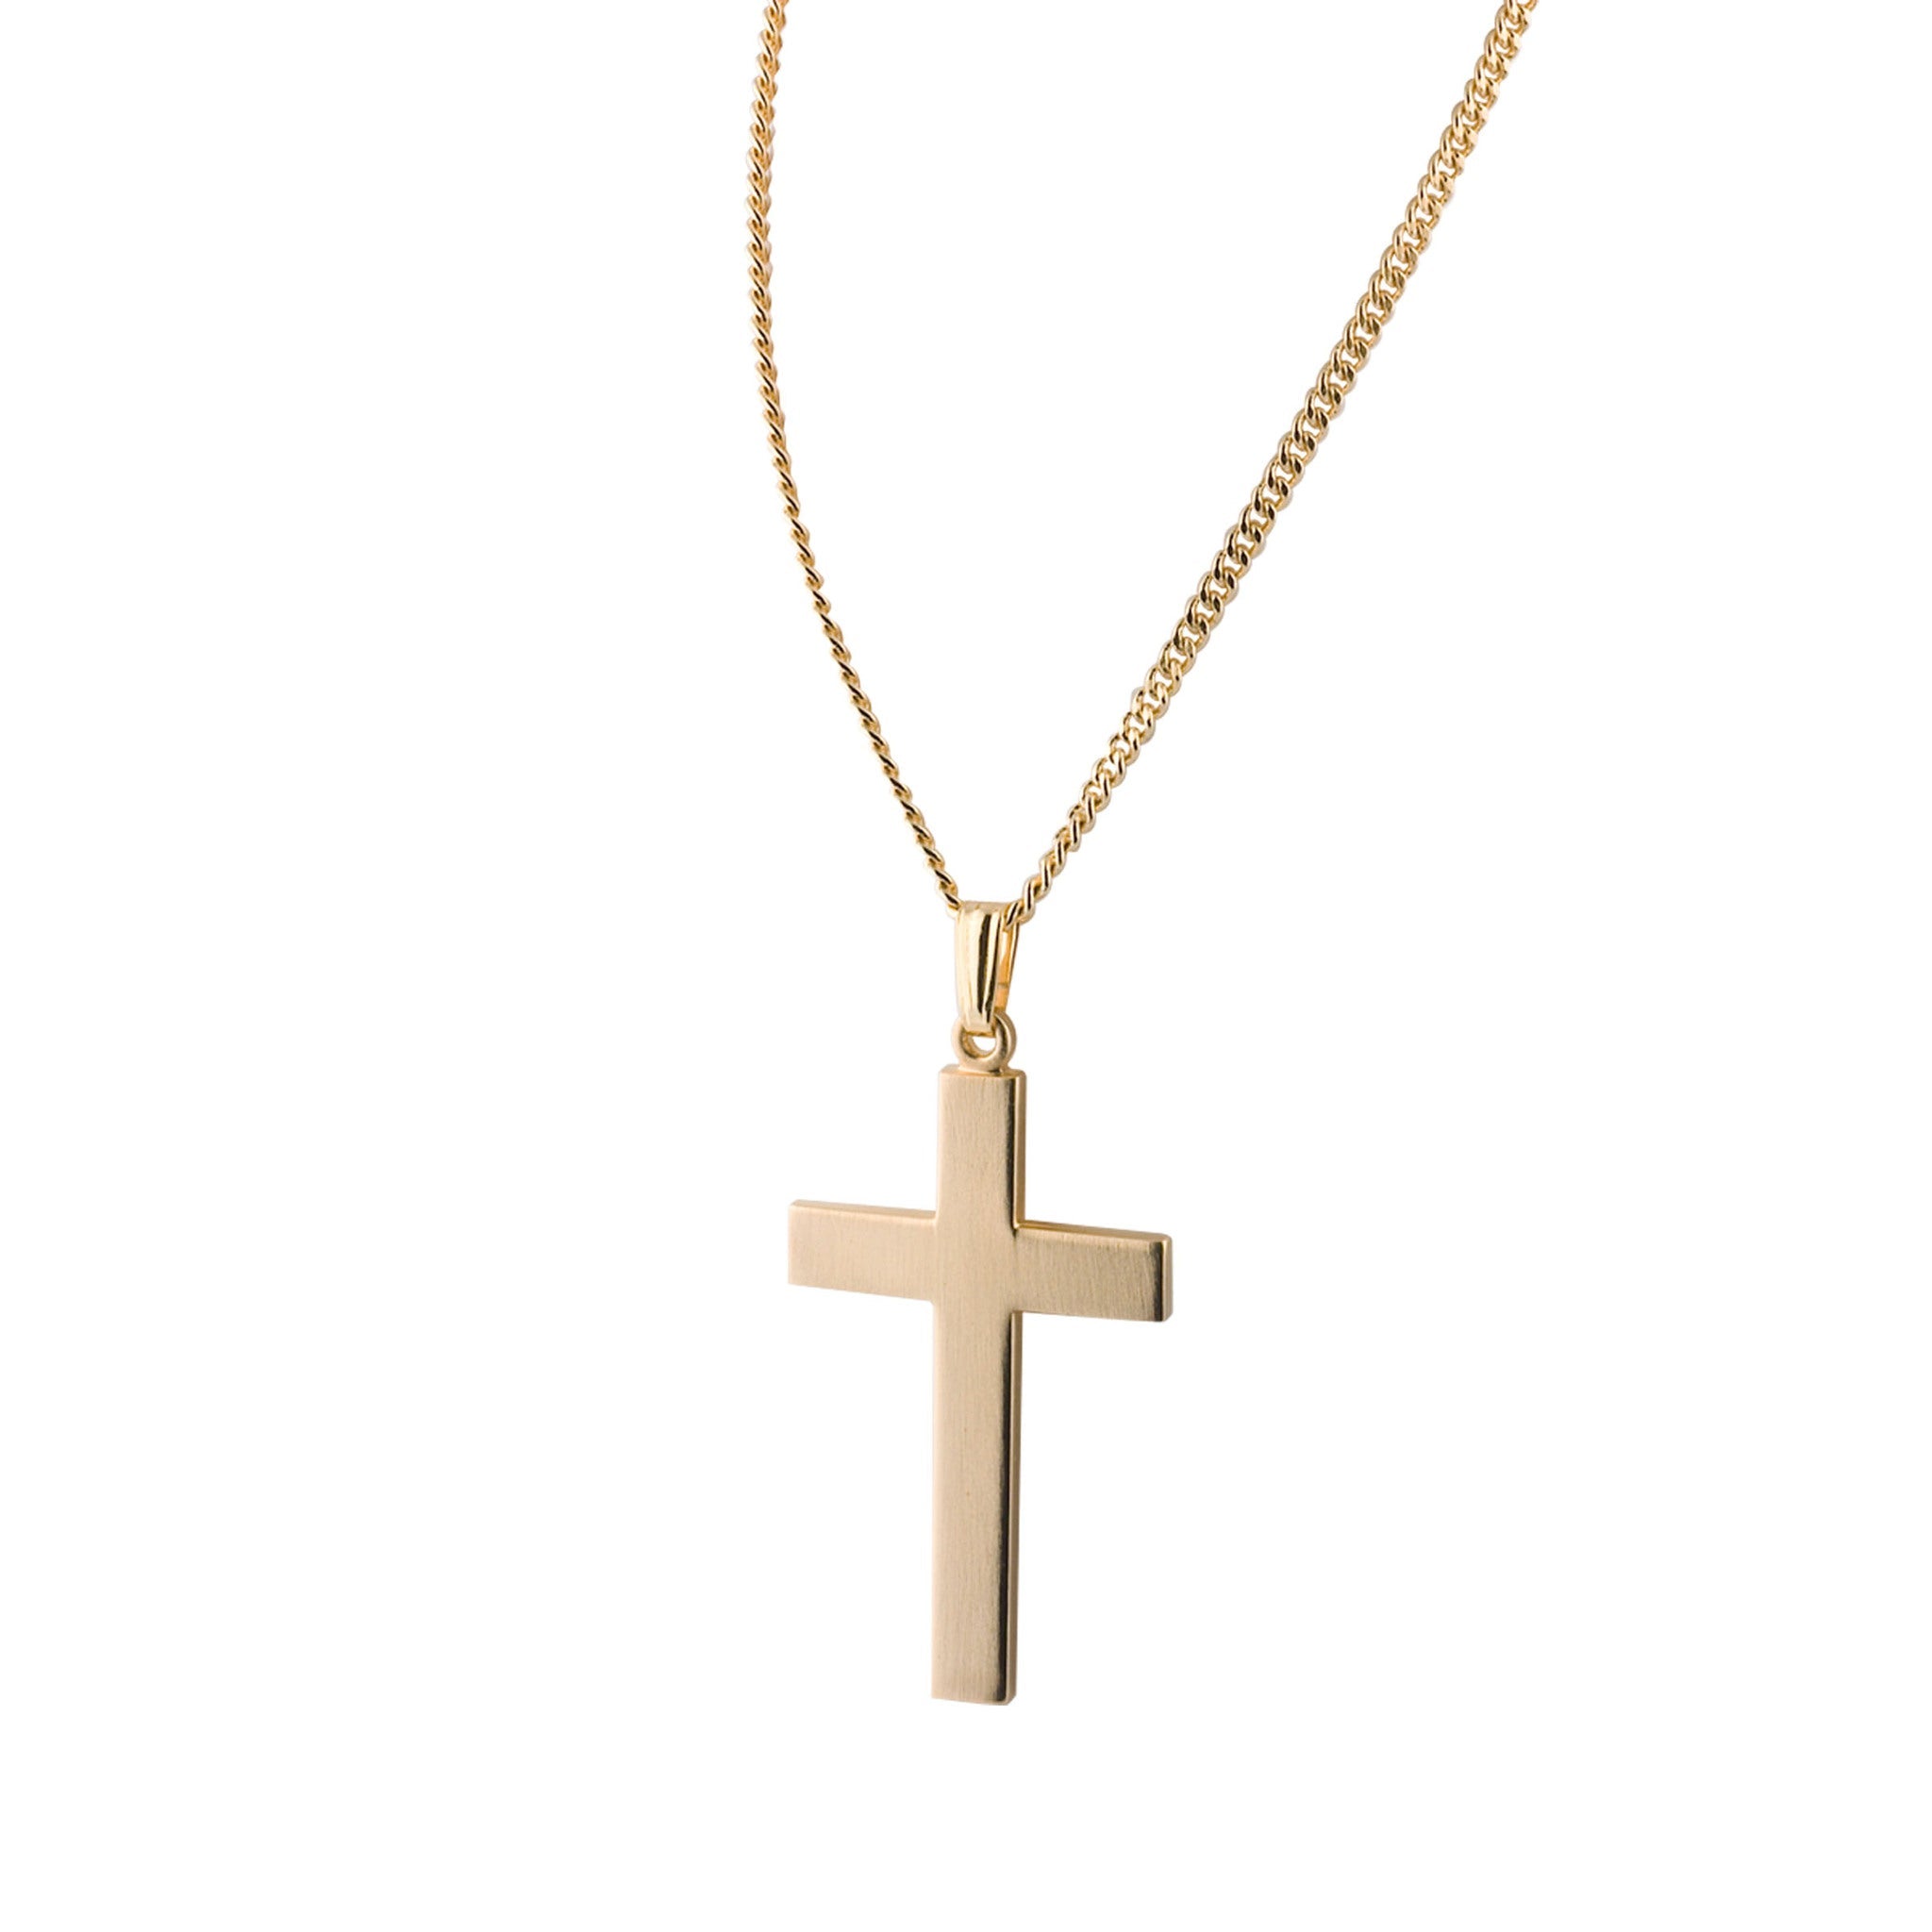 Buy Gold Black Cross Necklace Huge Thick Chain for Men Old World Orthodox  Crucifix Crucifix 2 Color Thick Chain 3 Layer Jesus Jewelry Jewellery  Online in India - Etsy